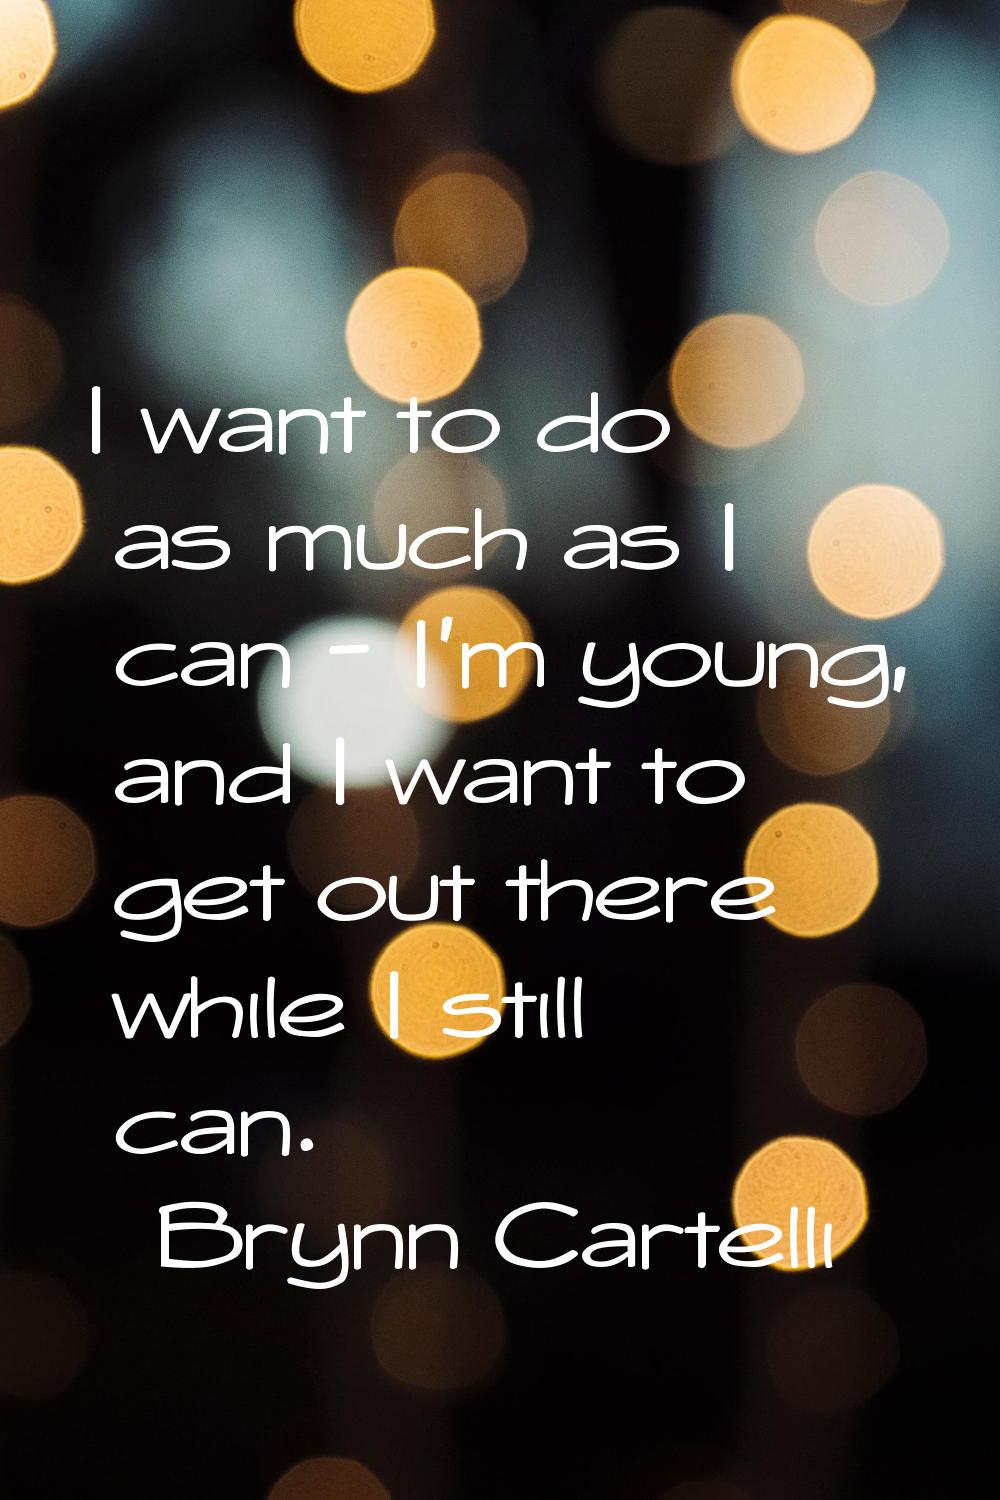 I want to do as much as I can - I'm young, and I want to get out there while I still can.